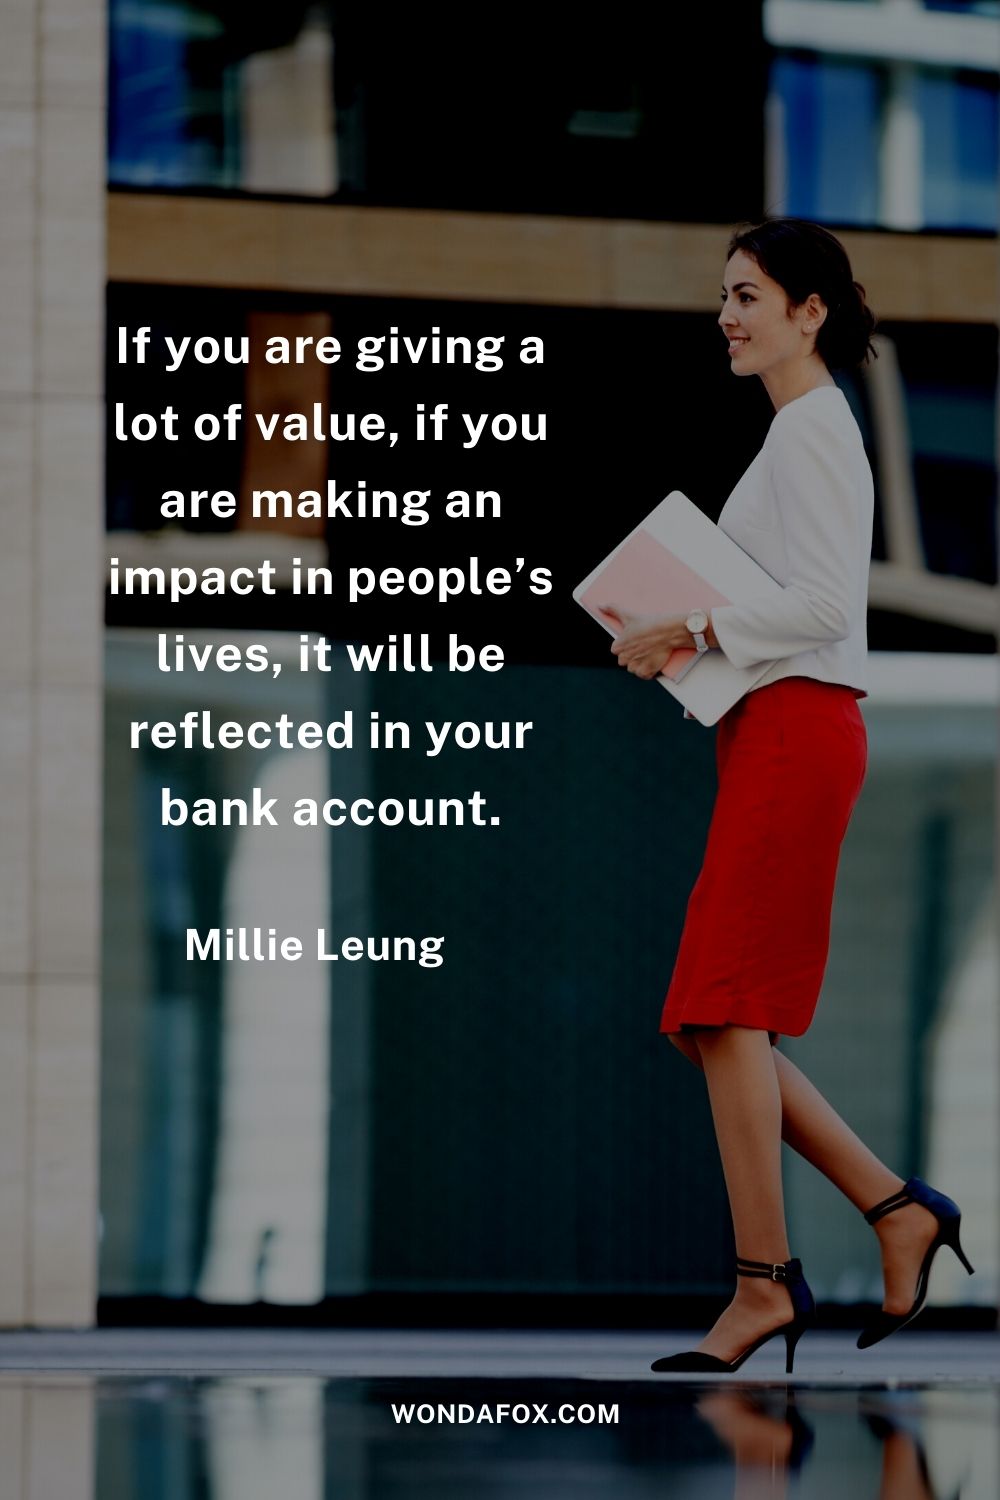 If you are giving a lot of value, if you are making an impact in people’s lives, it will be reflected in your bank account.